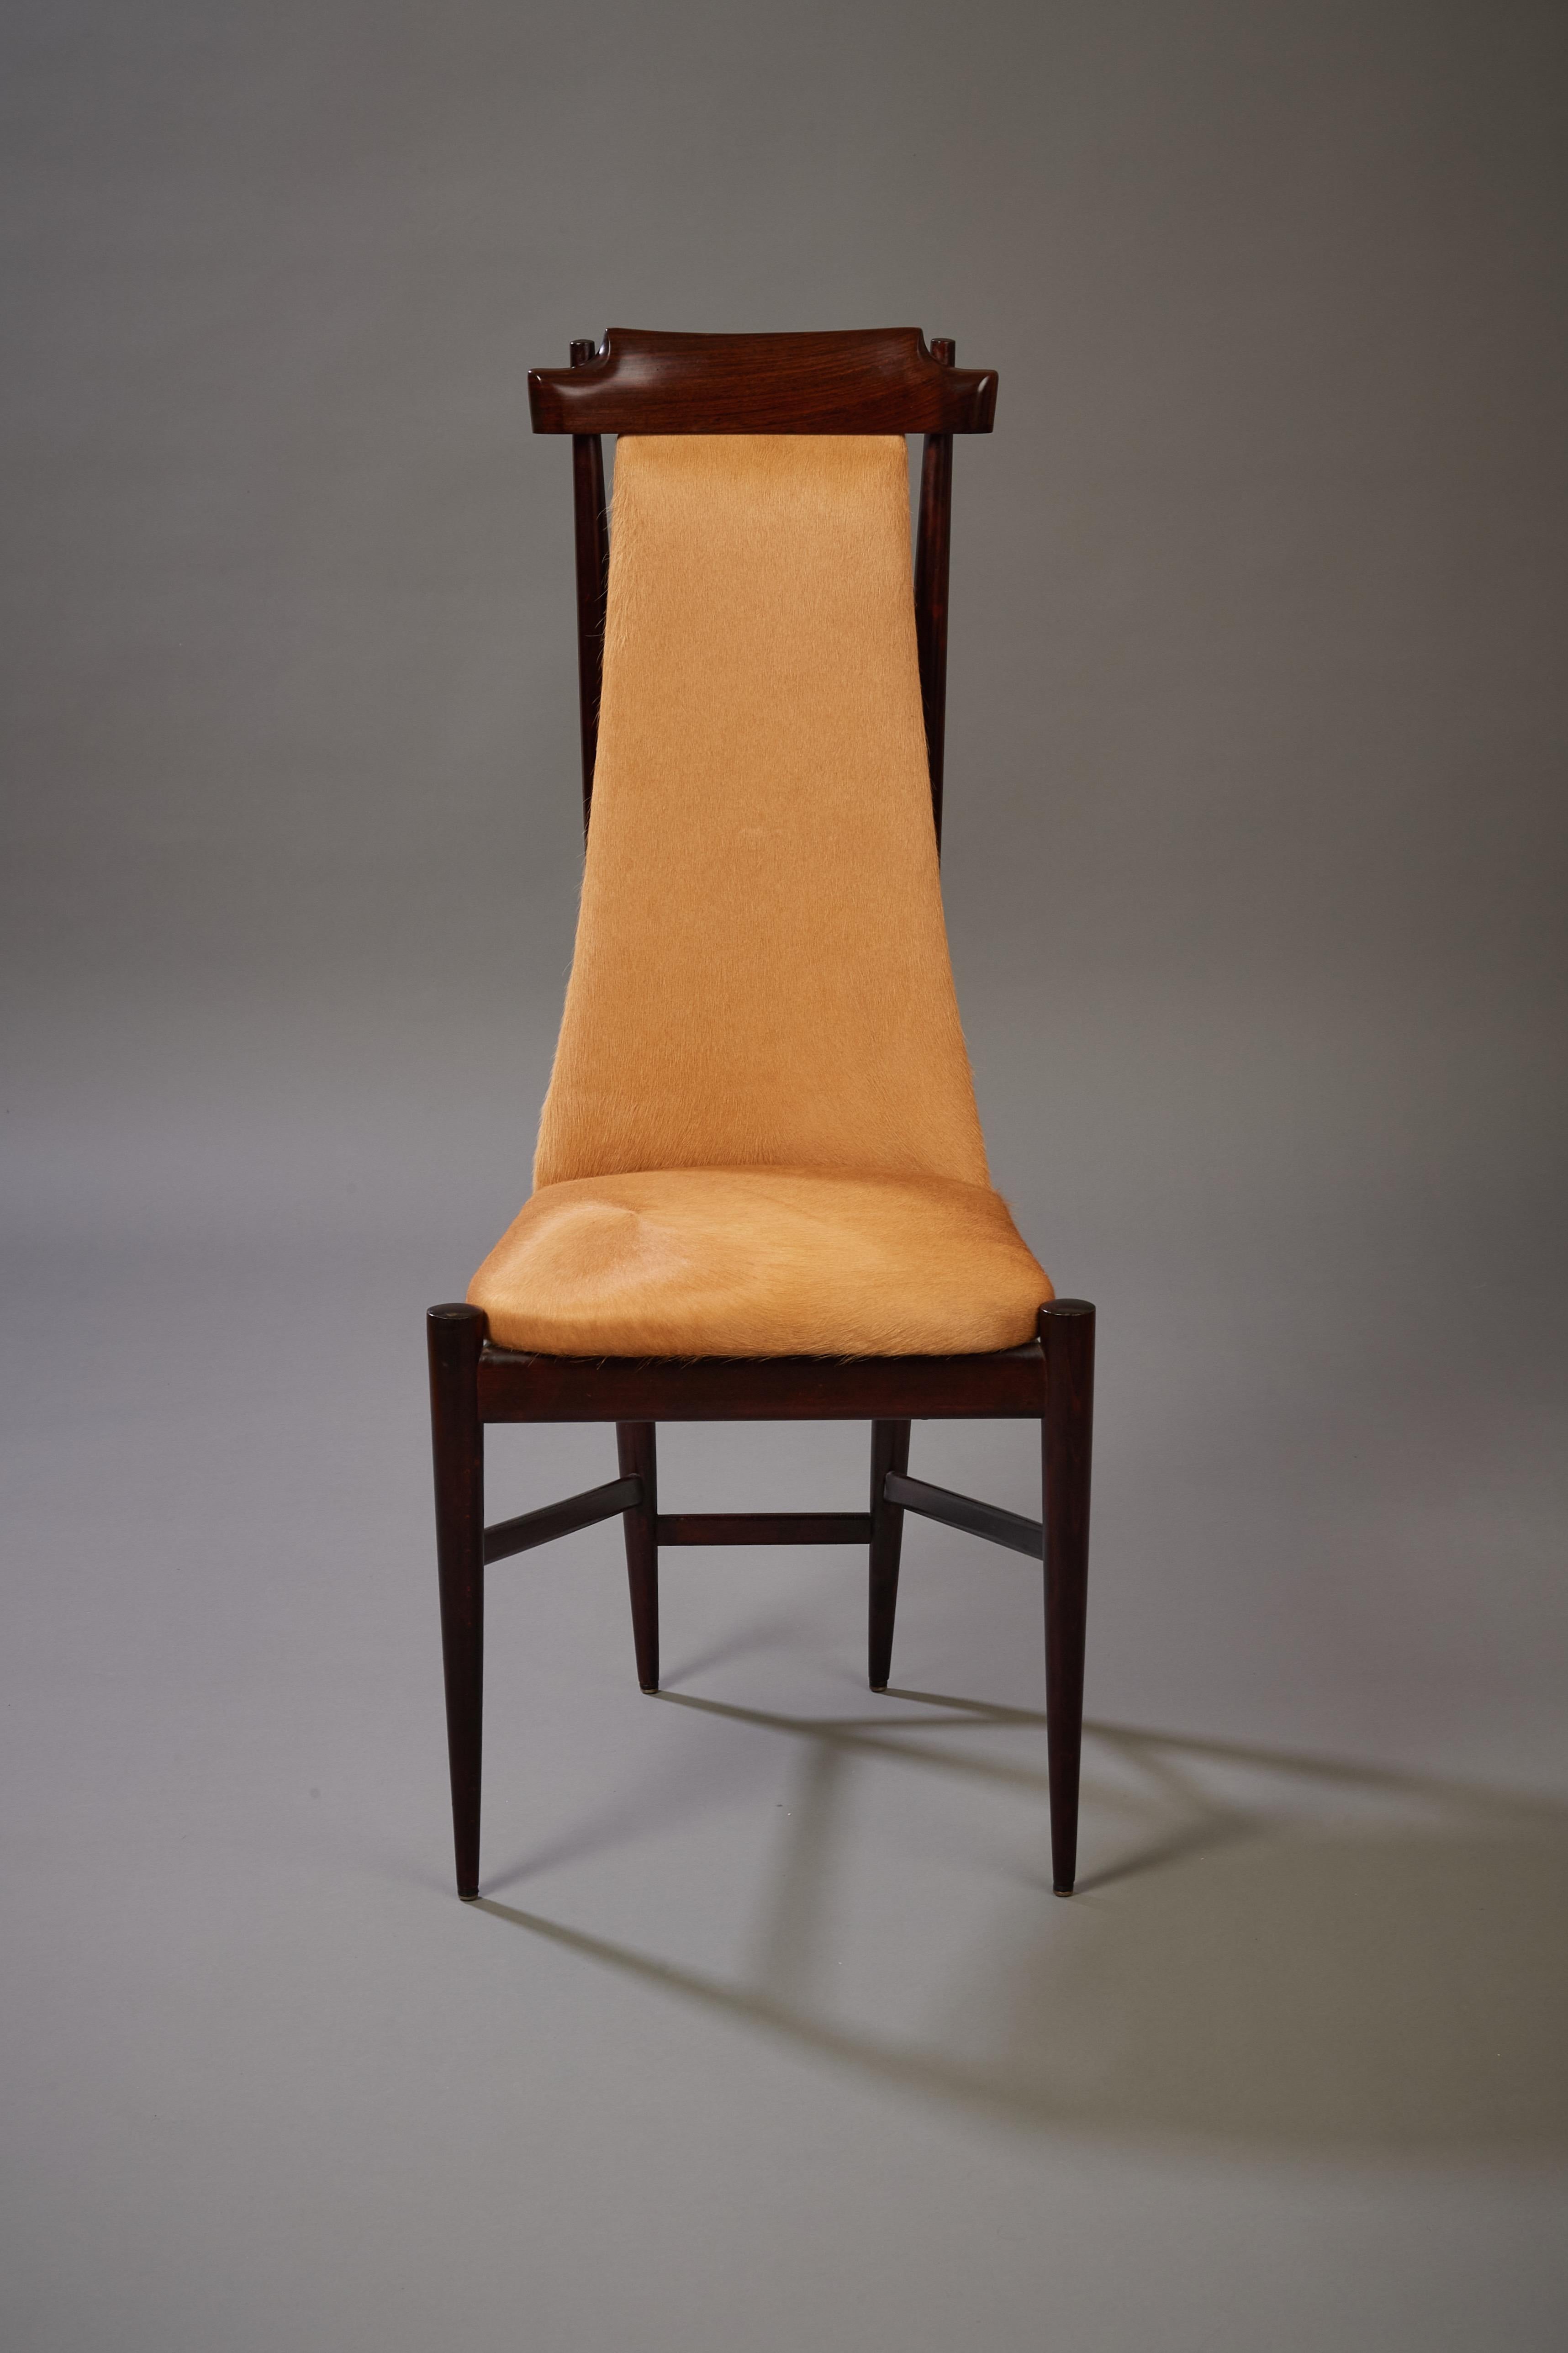 Sergio Rodrigues Six Dining Chairs in Wood and Tan Cowhide, Brazil, 1960s For Sale 10